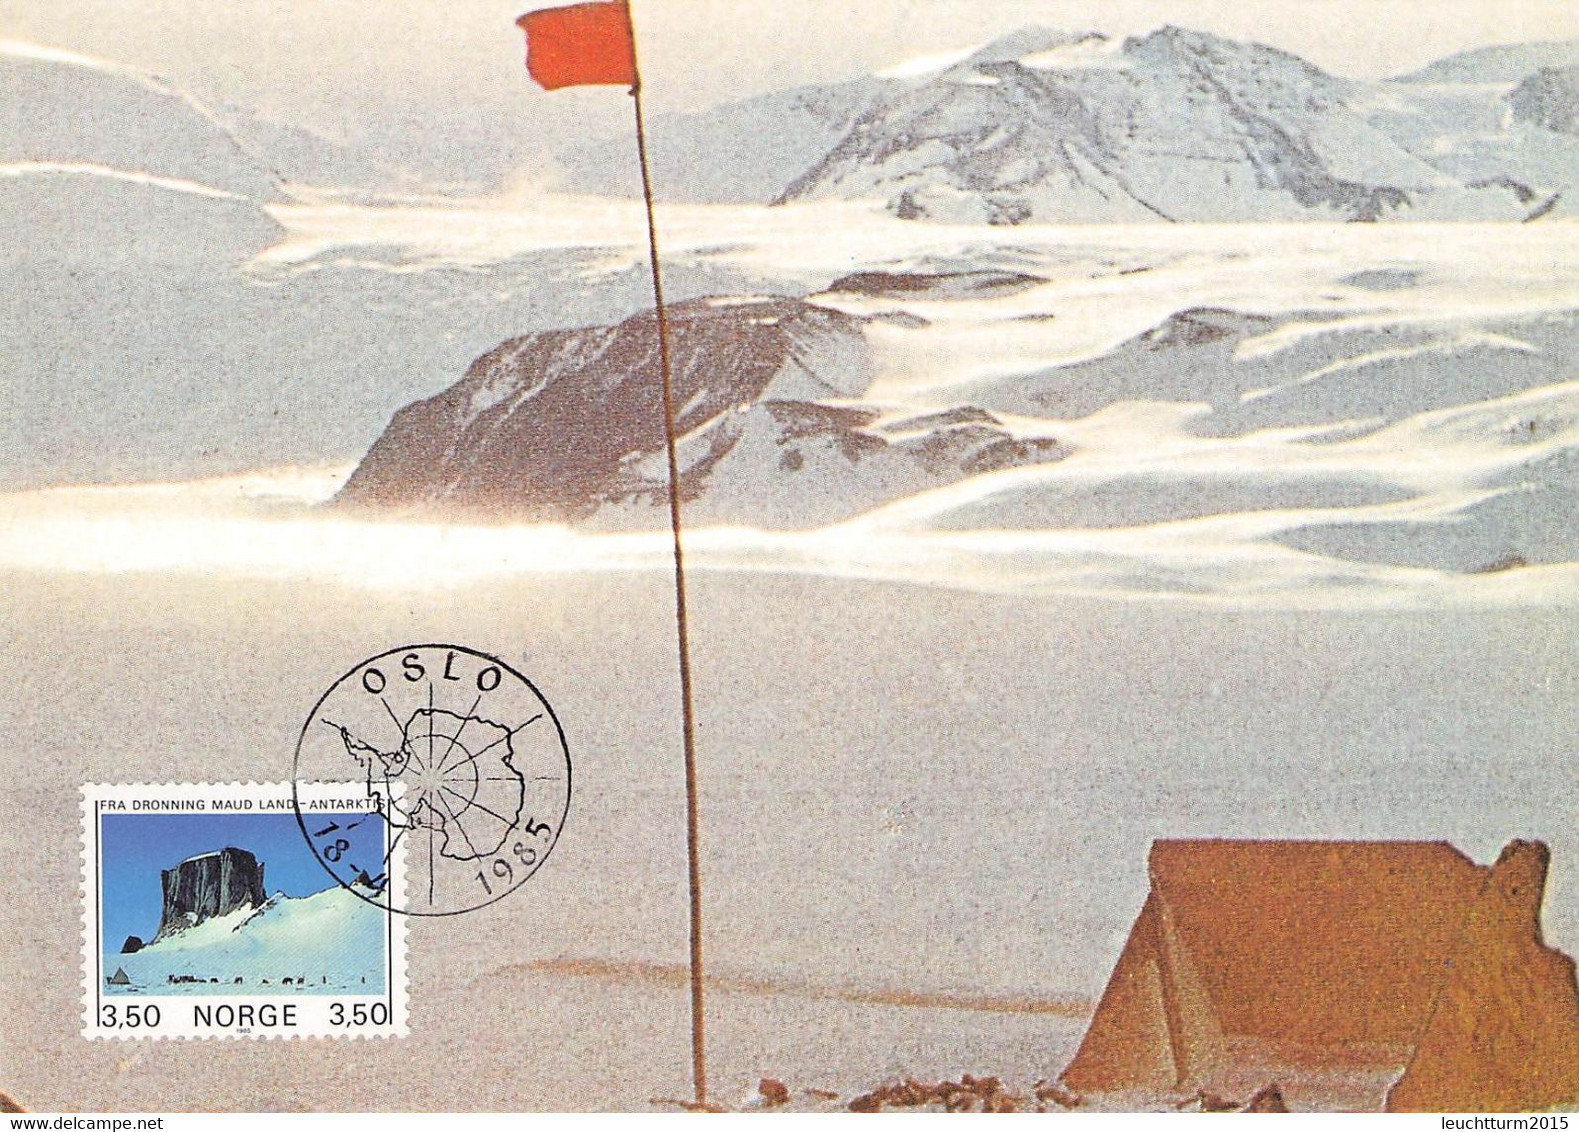 ARCTIC/ANTARCTIC - SMALL COLLECTION COVERS, FDC / QG 106